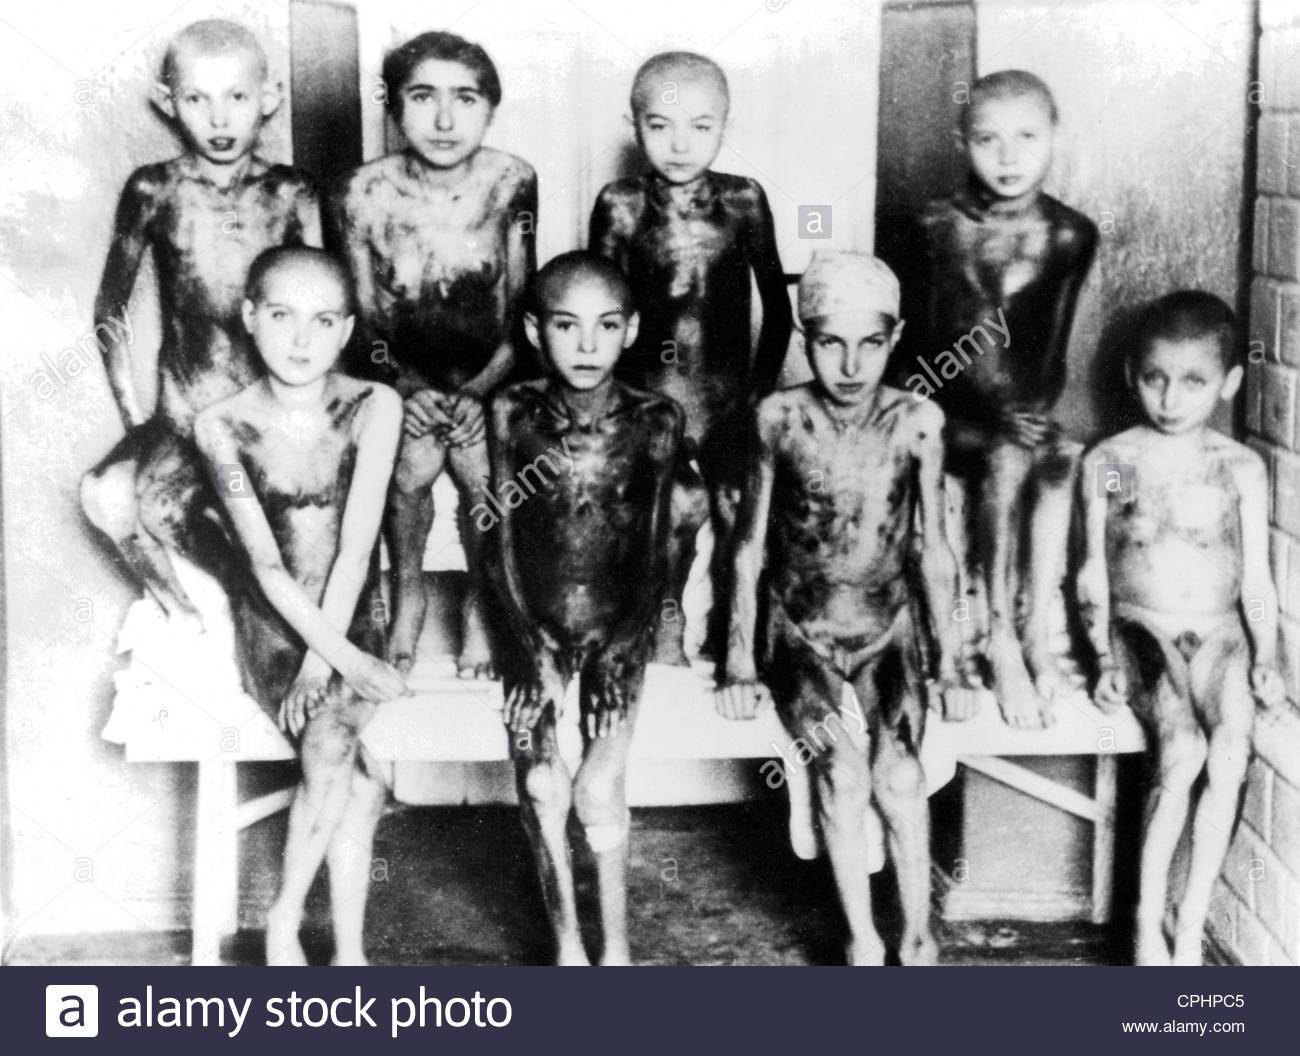 A group of children in Auschwitz. The children have fallen victims of medical experiments and their bodies are covered with burns. EN: